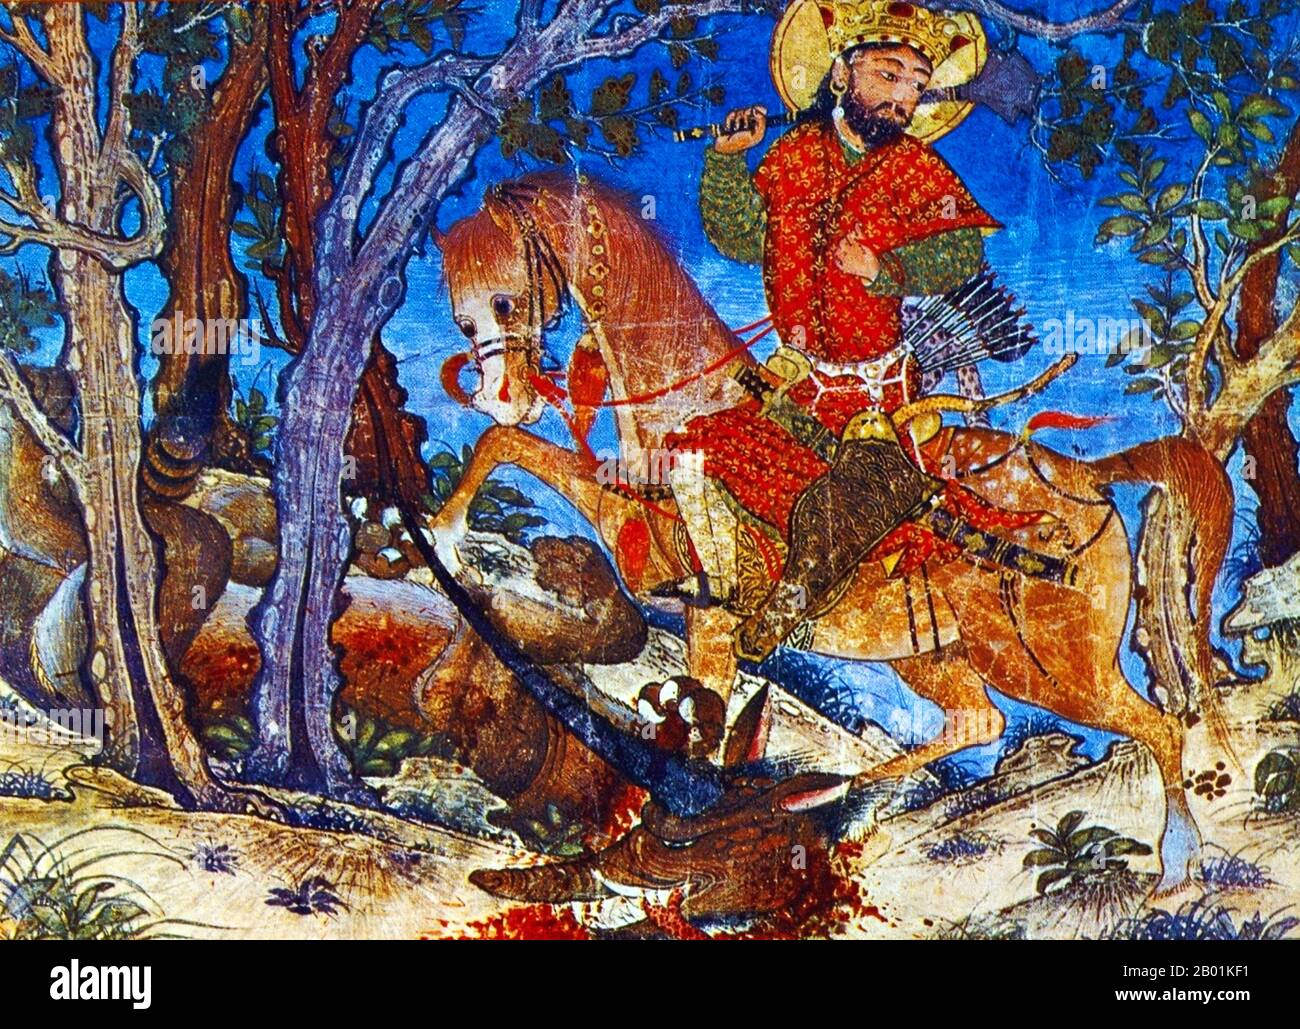 Iran/Persia: Bahram Gur killing a lion. Miniature painting from the Demotte Shahnameh, c. 1328-1336.  The Shahnameh or Shah-nama (Šāhnāmeh, 'The Book of Kings') is a long epic poem written by the Persian poet Ferdowsi between c. 977 and 1010 CE and is the national epic of Iran and related Perso-Iranian cultures. Consisting of some 60,000 verses, the Shahnameh tells the mythical and to some extent the historical past of Greater Iran from the creation of the world until the Islamic conquest of Persia in the 7th century. Stock Photo